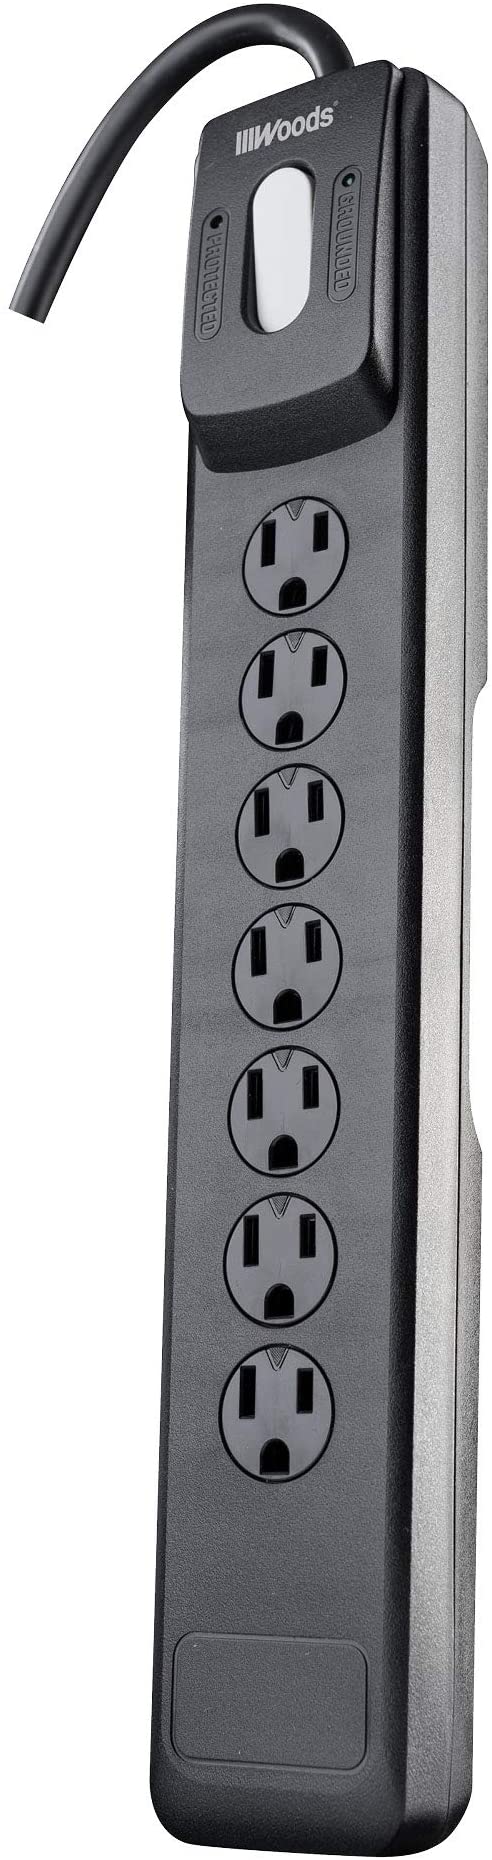 Woods 41496 Surge Protector With Safety Overload Feature 7 Outlets And 10 Ft Cord For 1440J Of Protection, Black